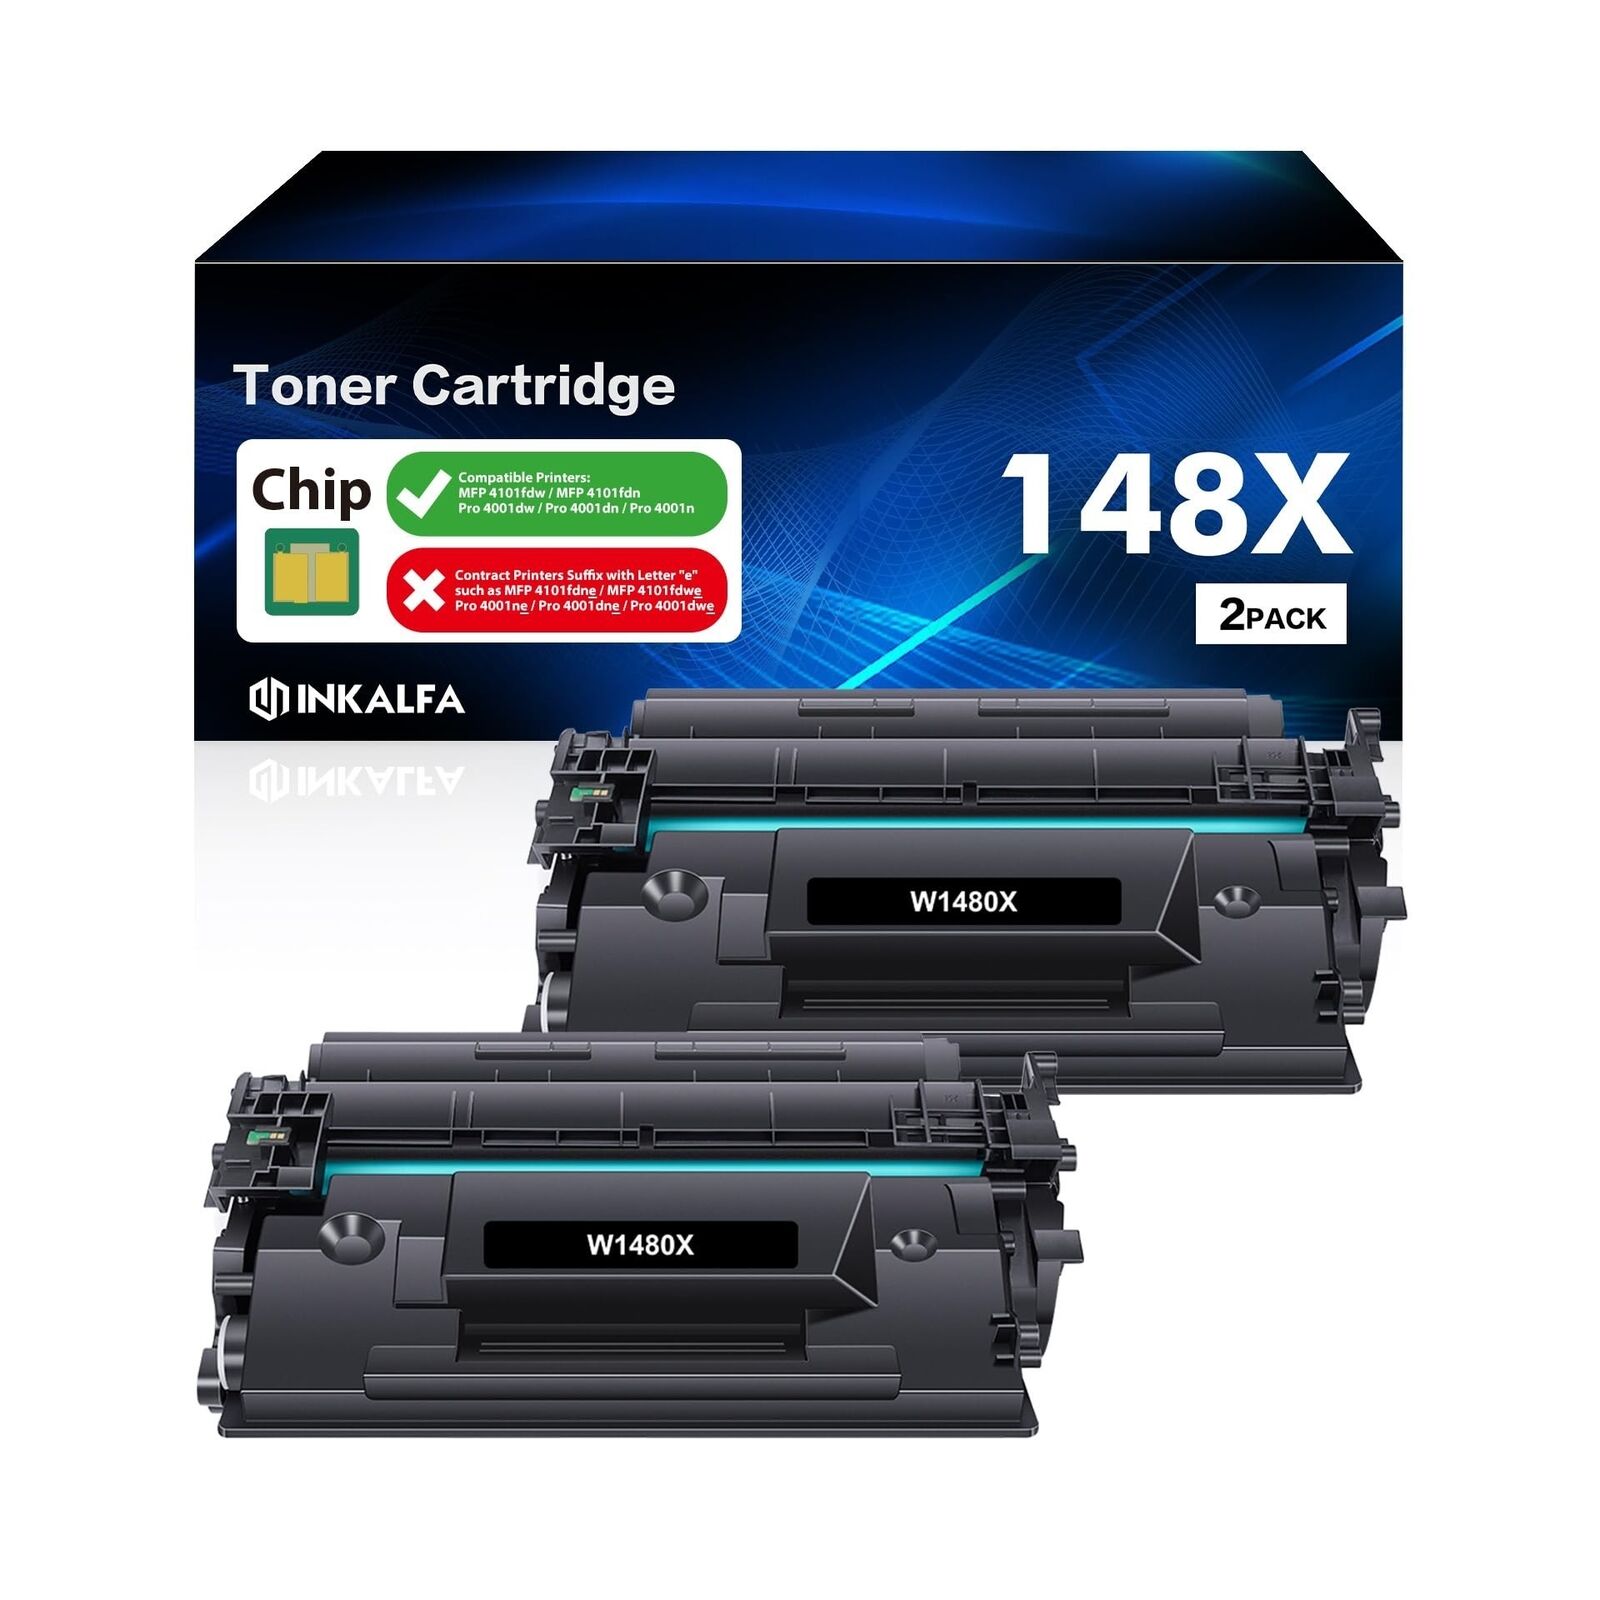 148X 148A Toner Cartridge Black: 2 Pack 148X Toner (with Chip) Compatible Rep...